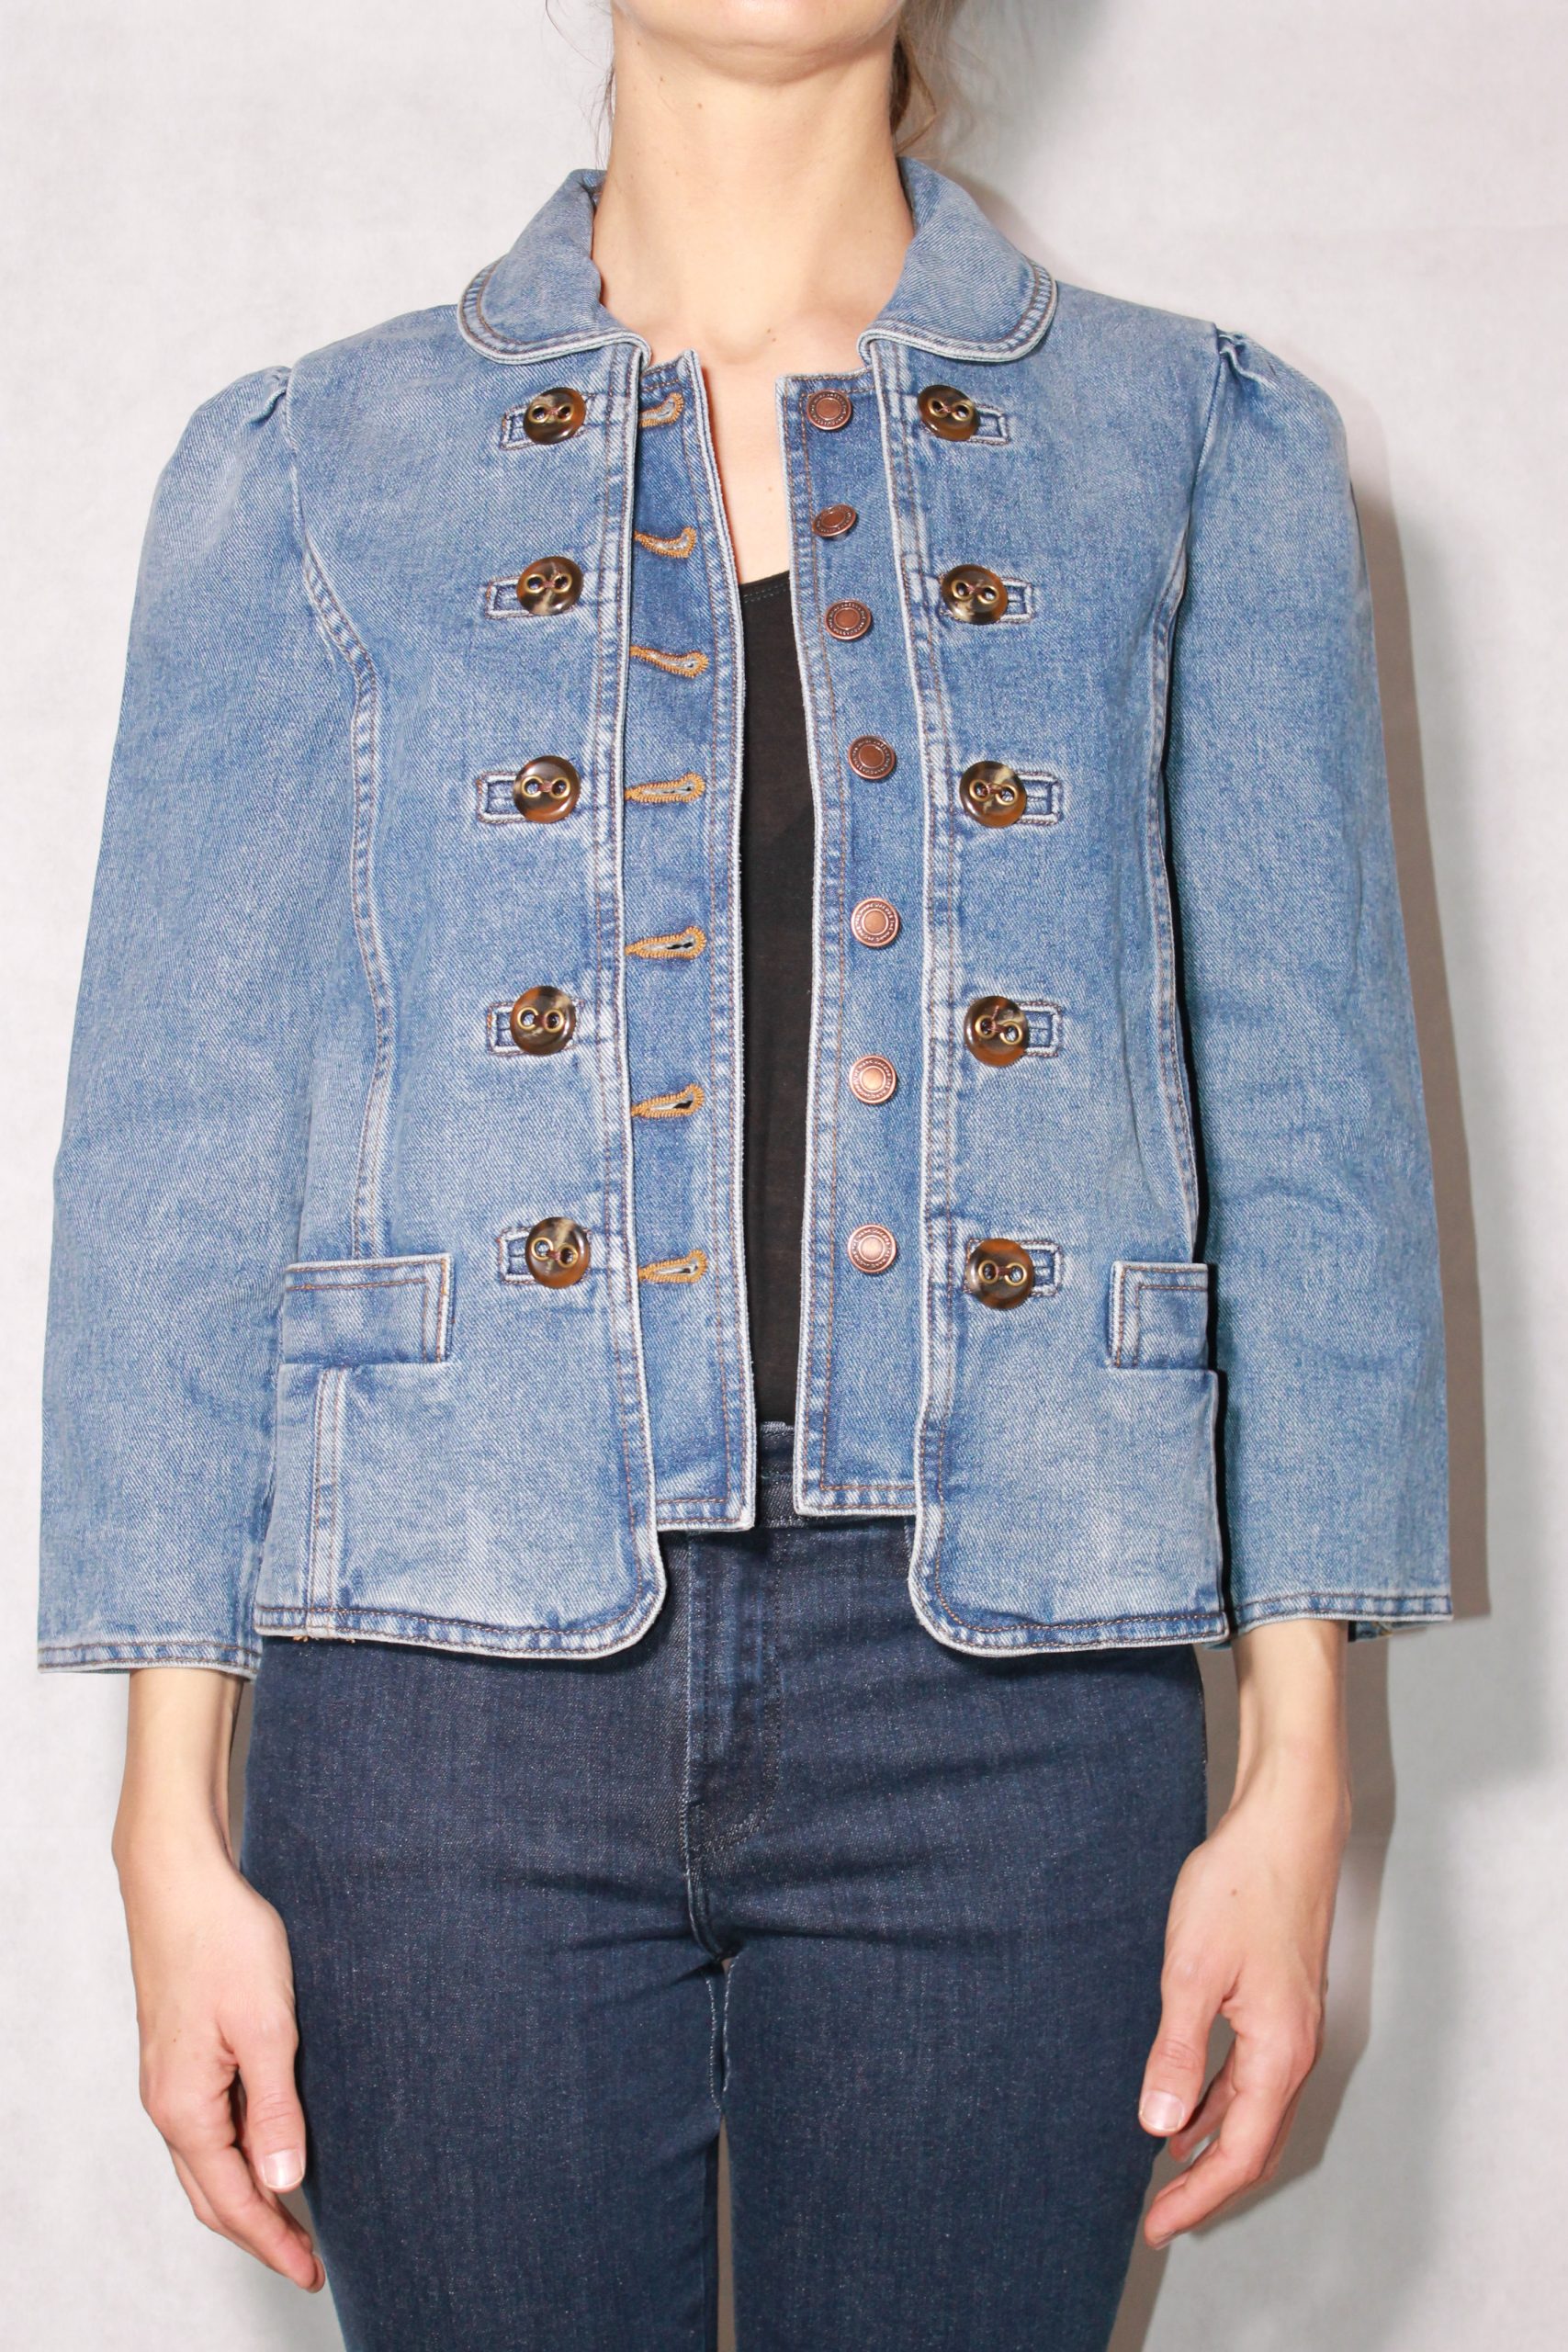 The Fitted Denim Jacket